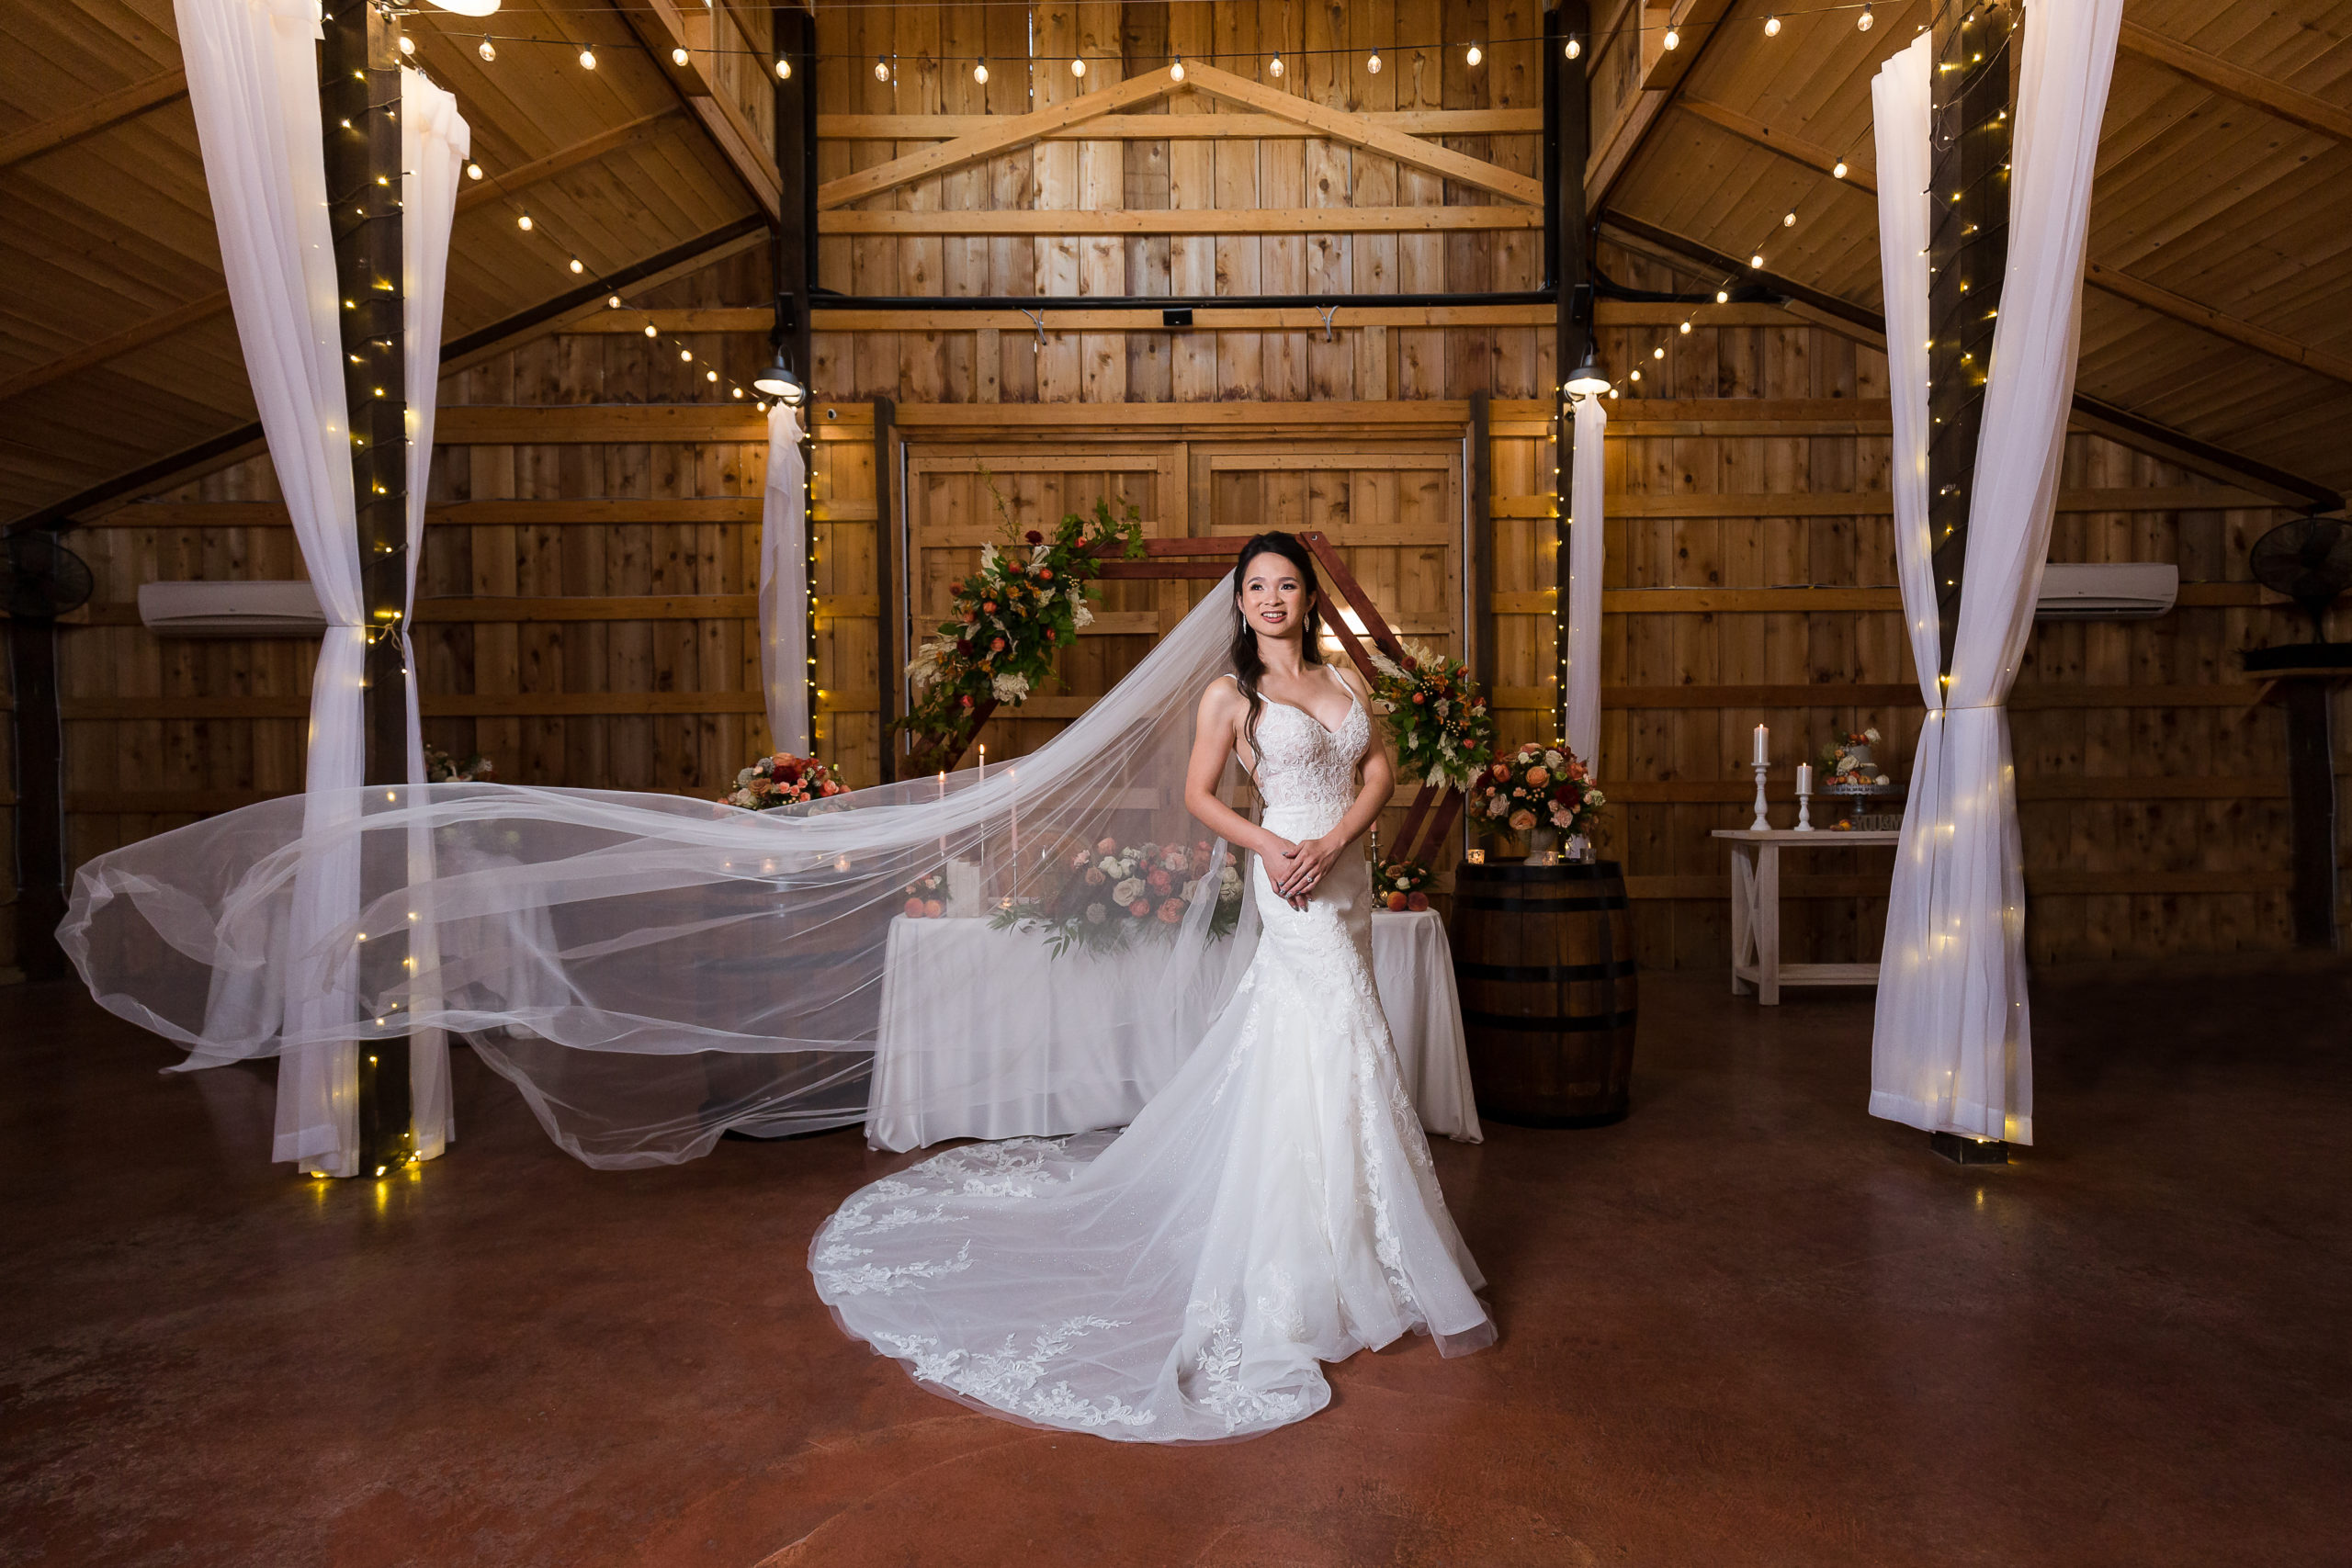 Dallas wedding photographer photographs bridal portrait with bride in a lace wedding dressing posing with her hands to her waist as she looks in the distance and her veil blows in the wind